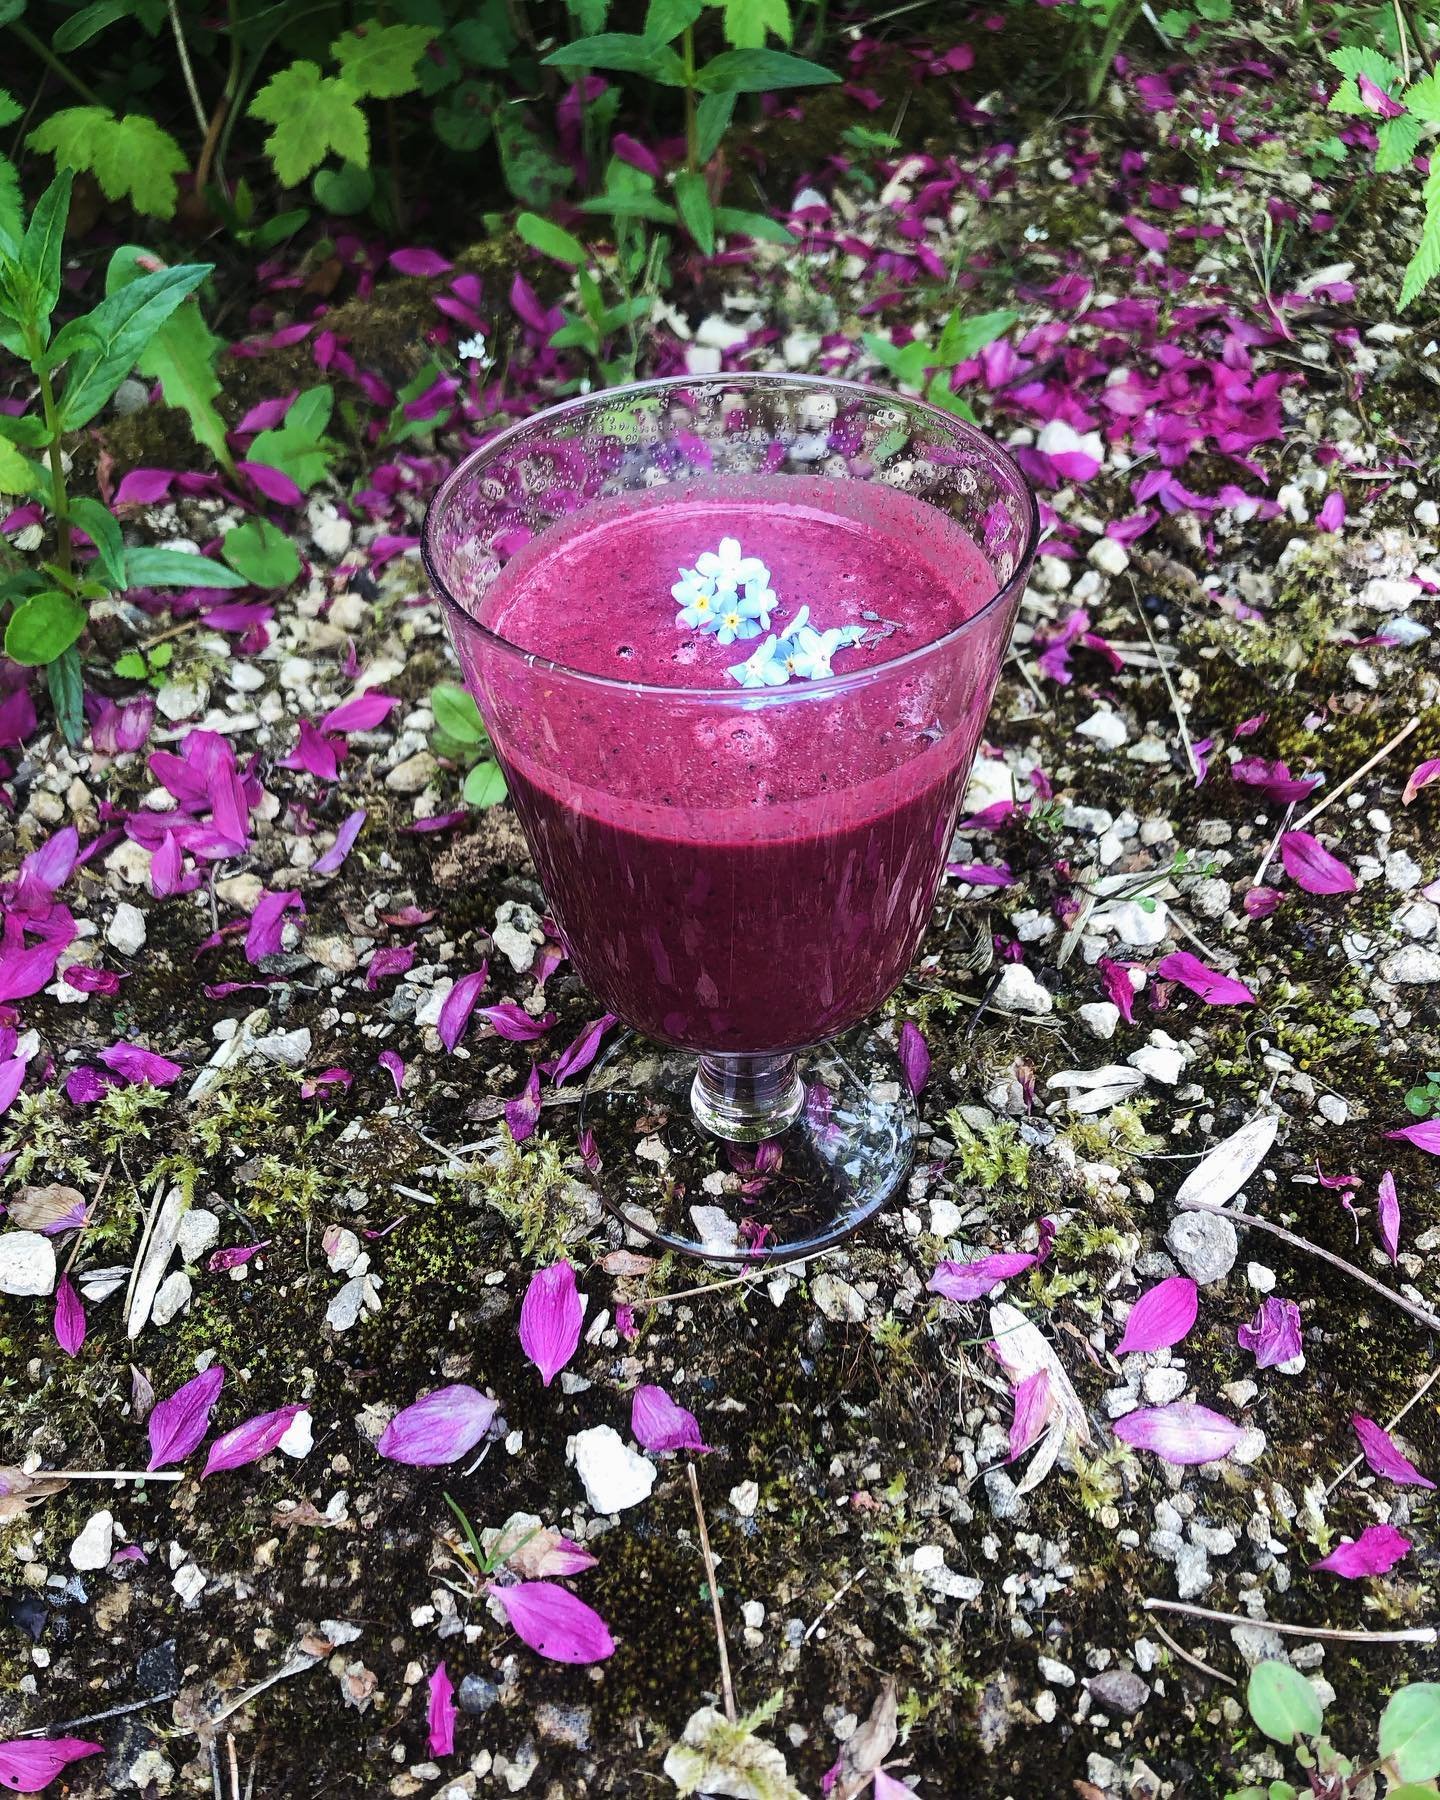 Venus Day 🌹

For the love of Pinks 💕💕💕 A cleansing blood and lymph tonic for an energy boost after a hot yoga 🧘&zwj;♀️ 🙏 @alignbodyandmind for the attune and attain session 

A good reminder to look at what we are focusing on attuning or attain